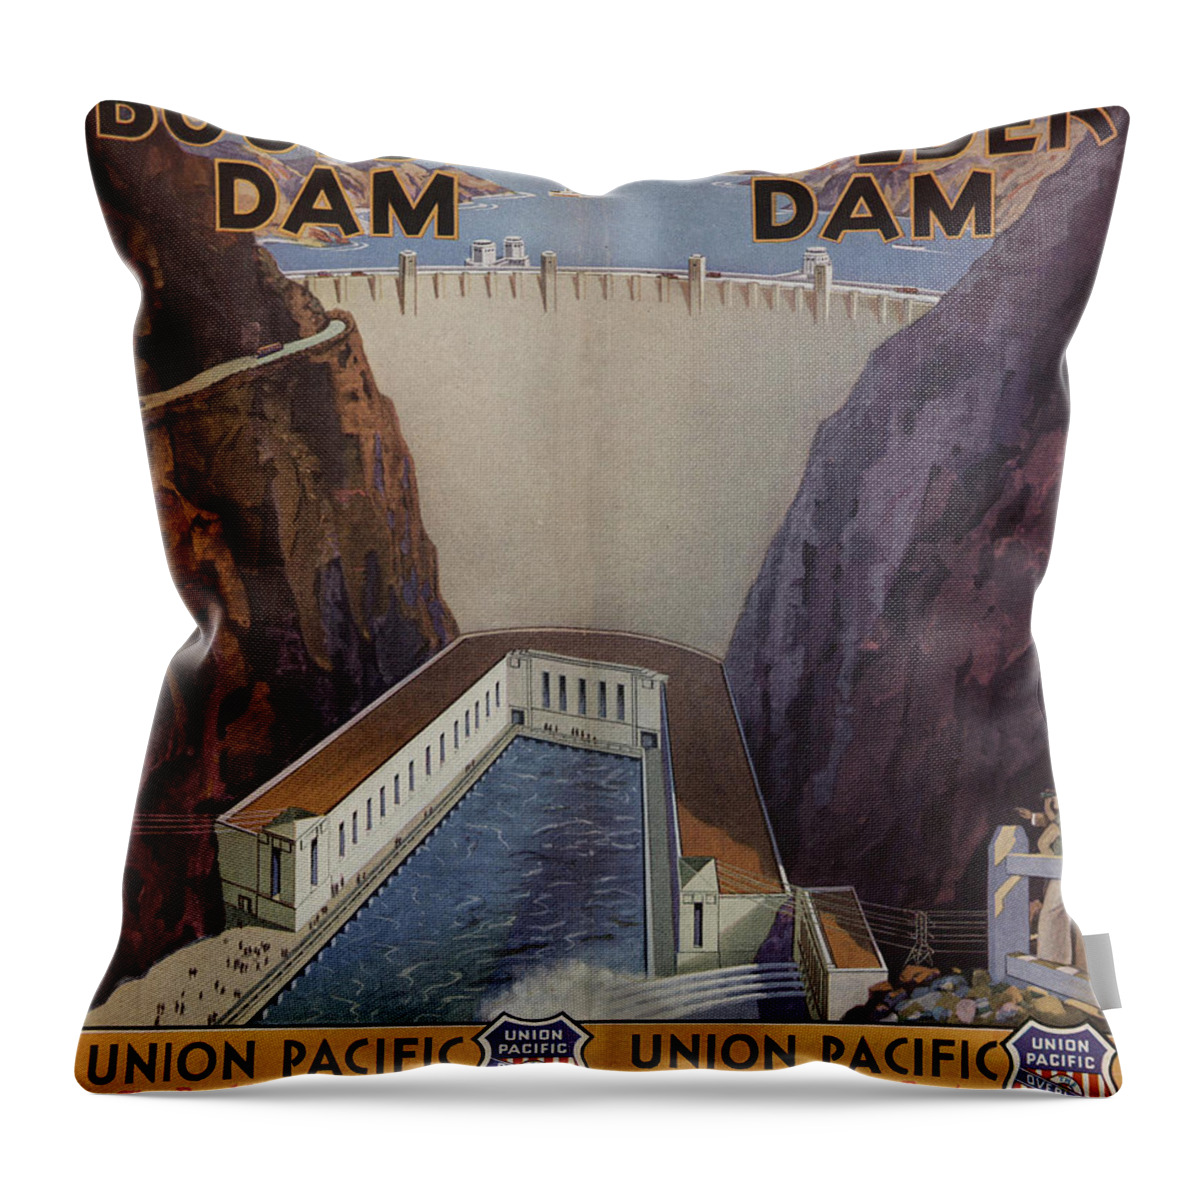 Boulder Dam Throw Pillow featuring the photograph Vintage Train Ad 1935 by Andrew Fare